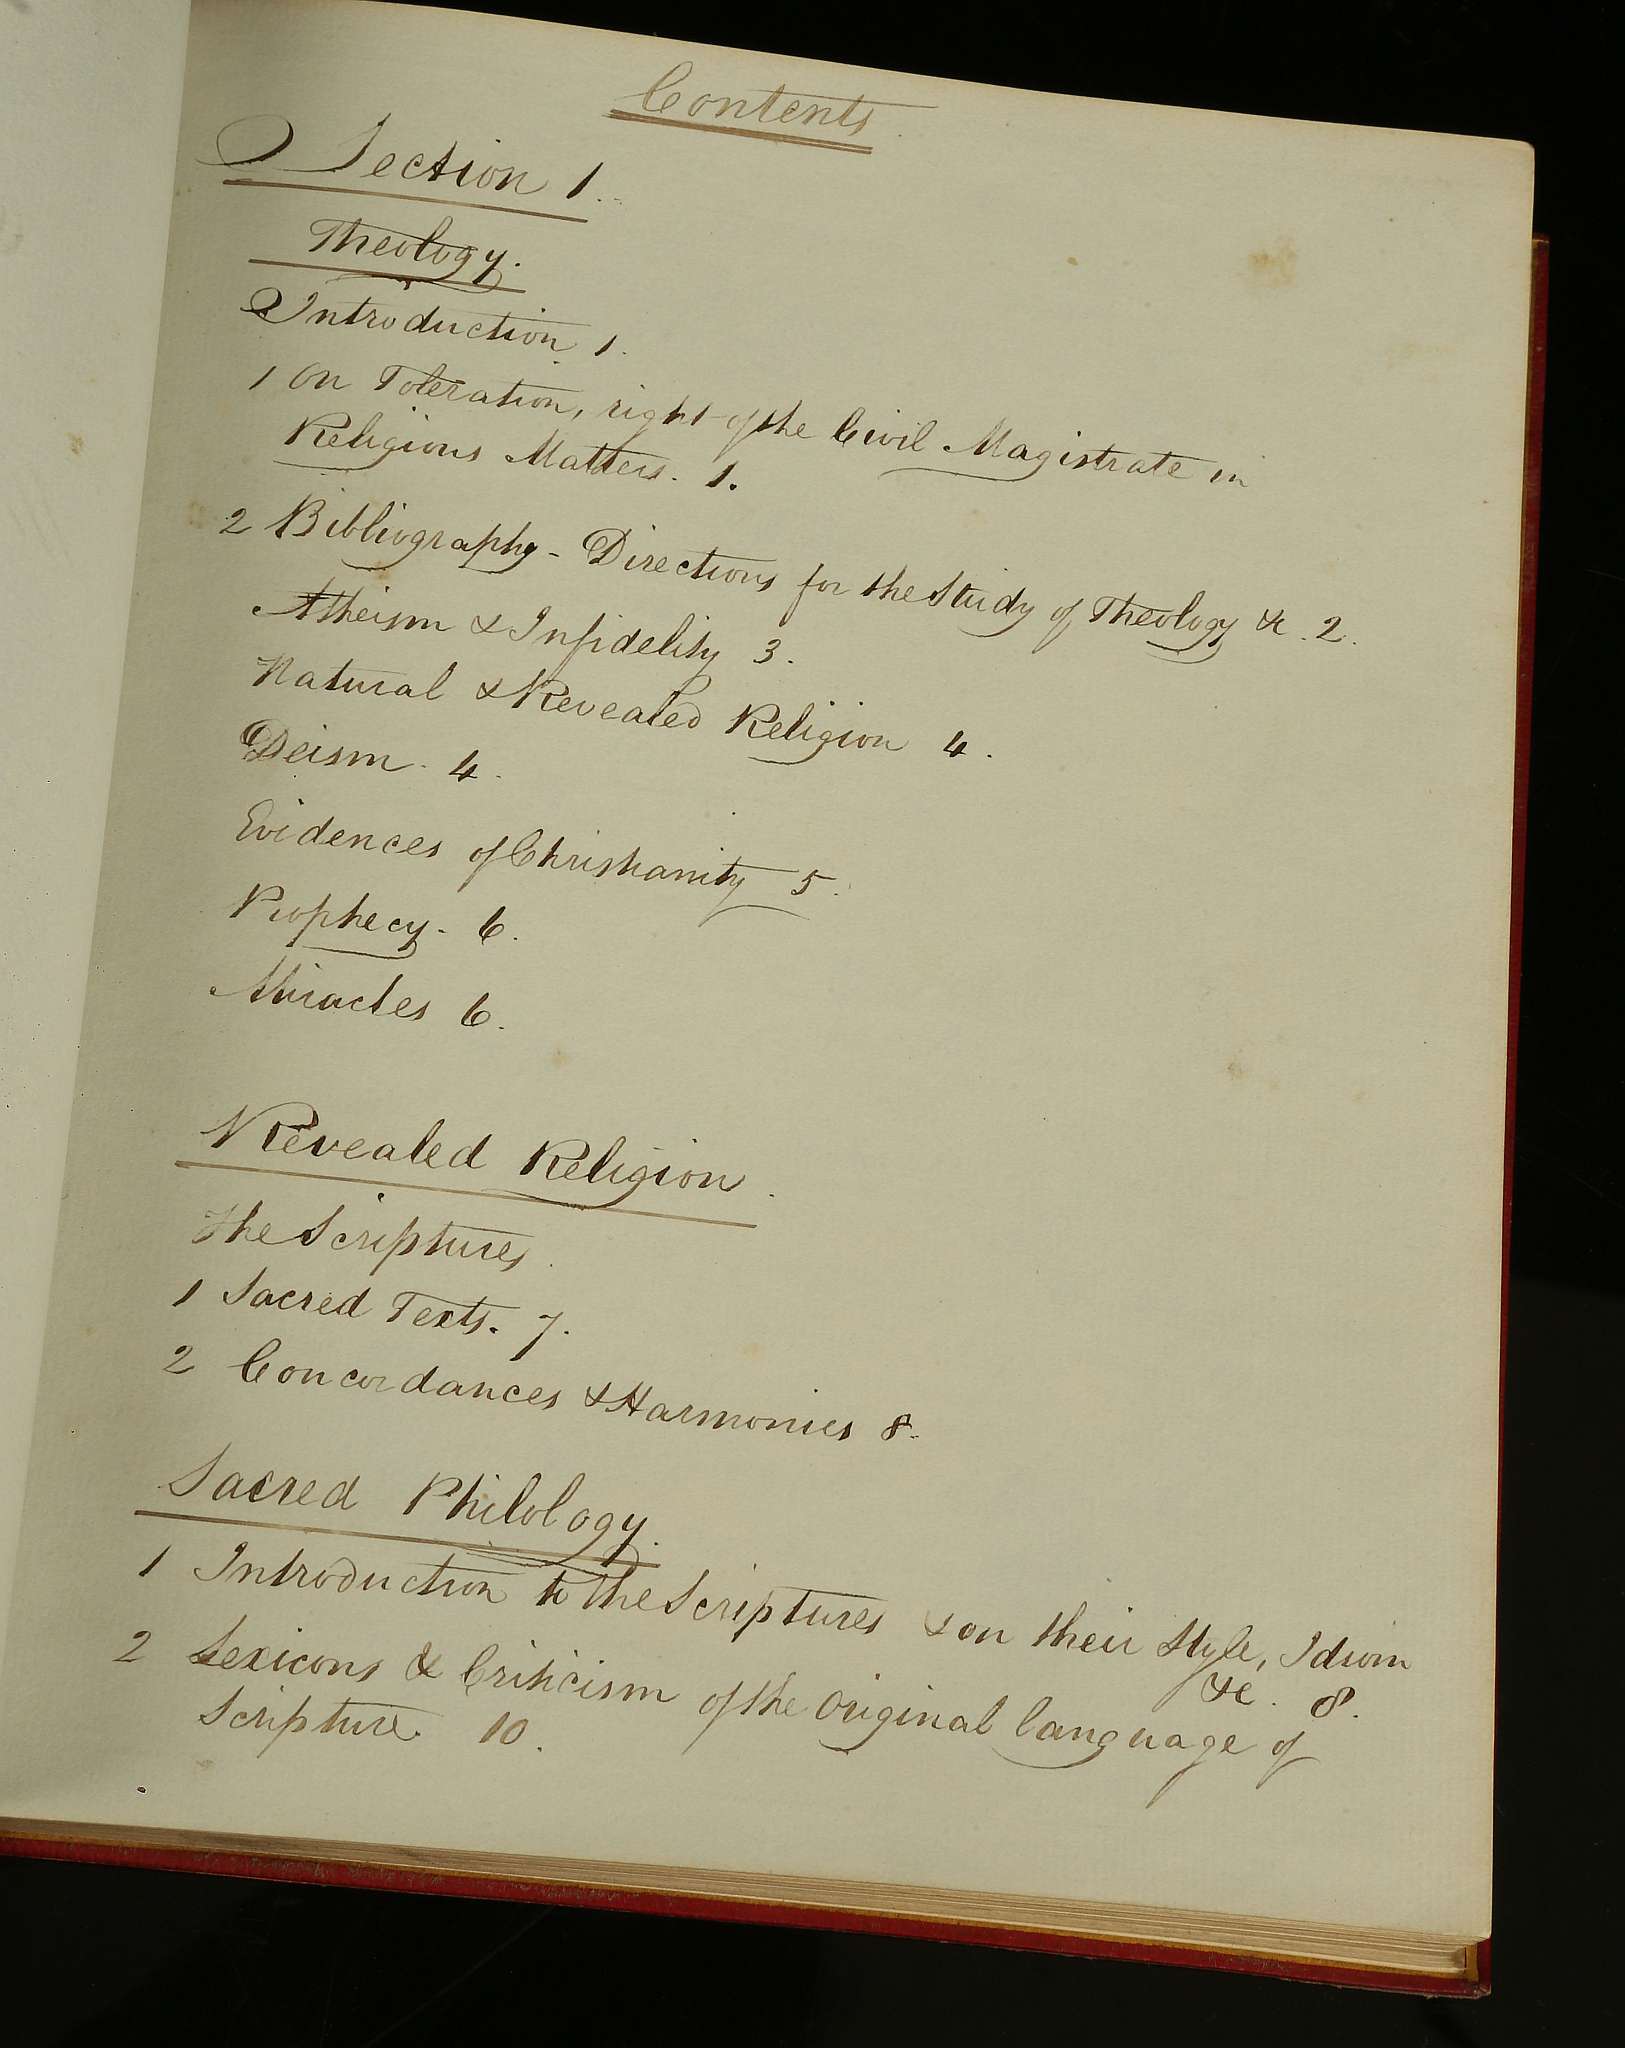 MS. A Catalogue of the Library of the Revd: R:d Harrington. 1835. 4to. Containing an inventory of - Image 4 of 5